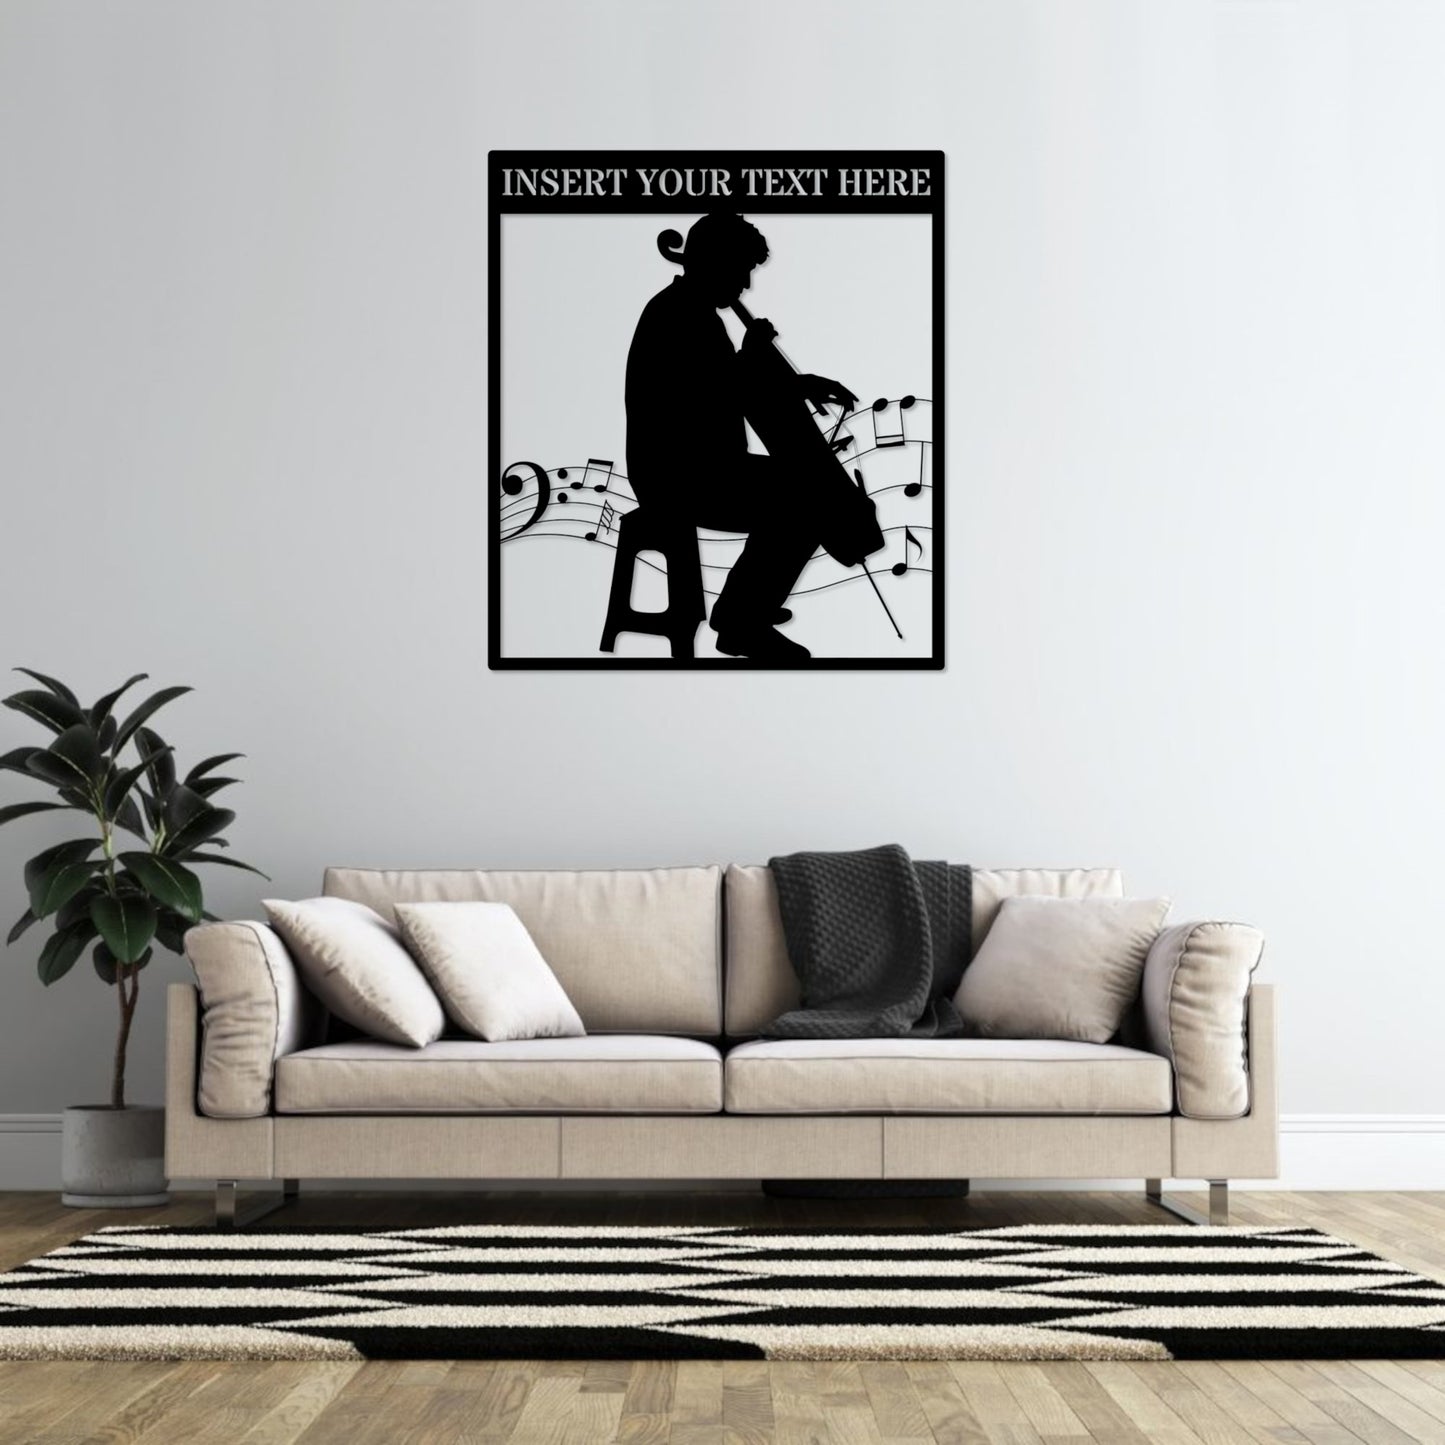 Personalized Cello Name Metal Sign. Custom Cello Player Wall Decor Art.  Music Room Decoration. Musician Wall Hanging. Jazz Music Lover Gift